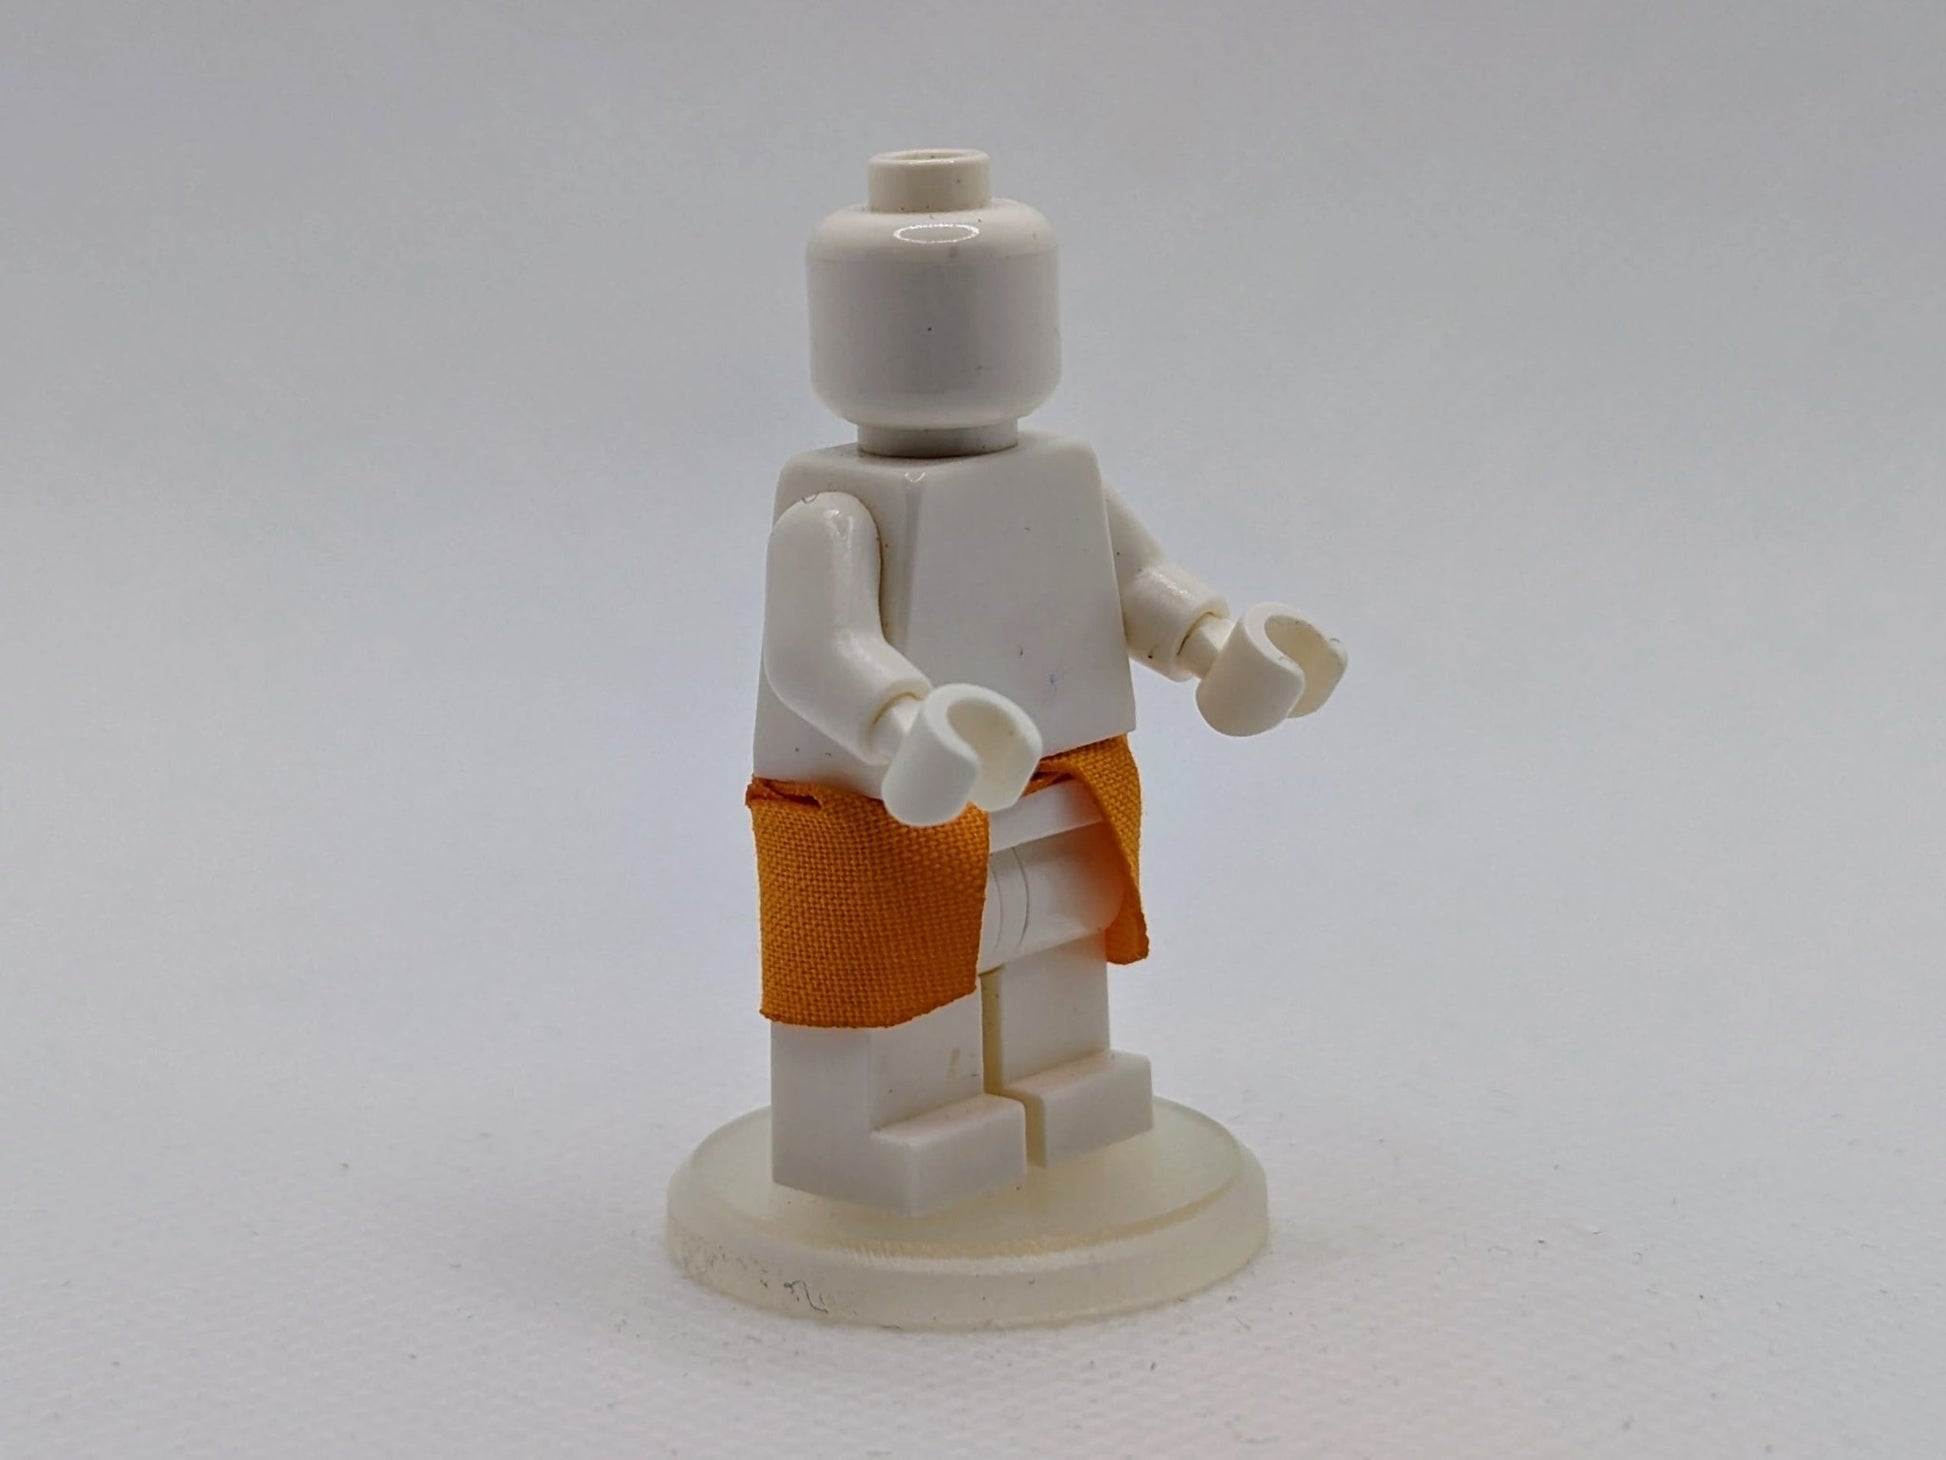 Waist Cape by capes4minifigs - RPGminifigs